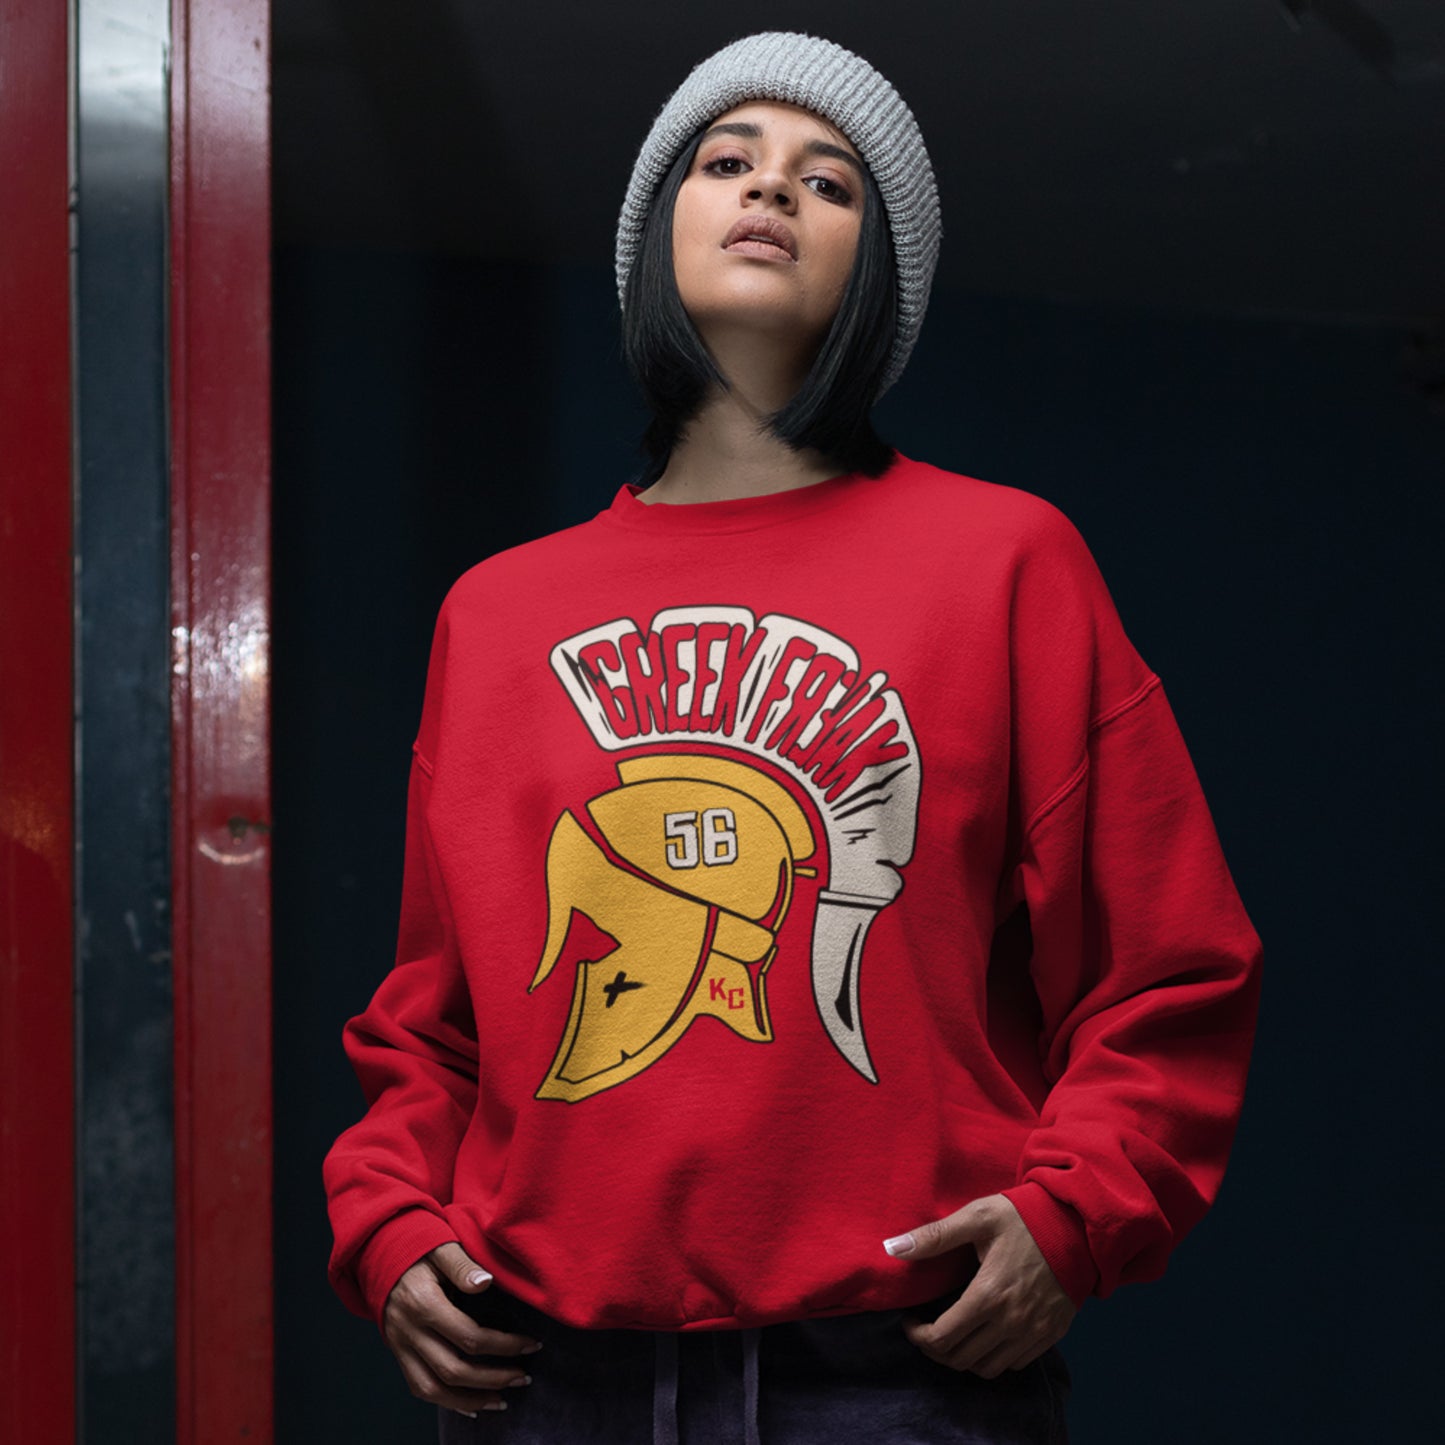 KC Swag Kansas City Chiefs White & Gold Greek Freak (with Trojan Helmet) on a Red Crewneck Sweatshirt worn by beaning wearing female model standing under a white light outside of a red door